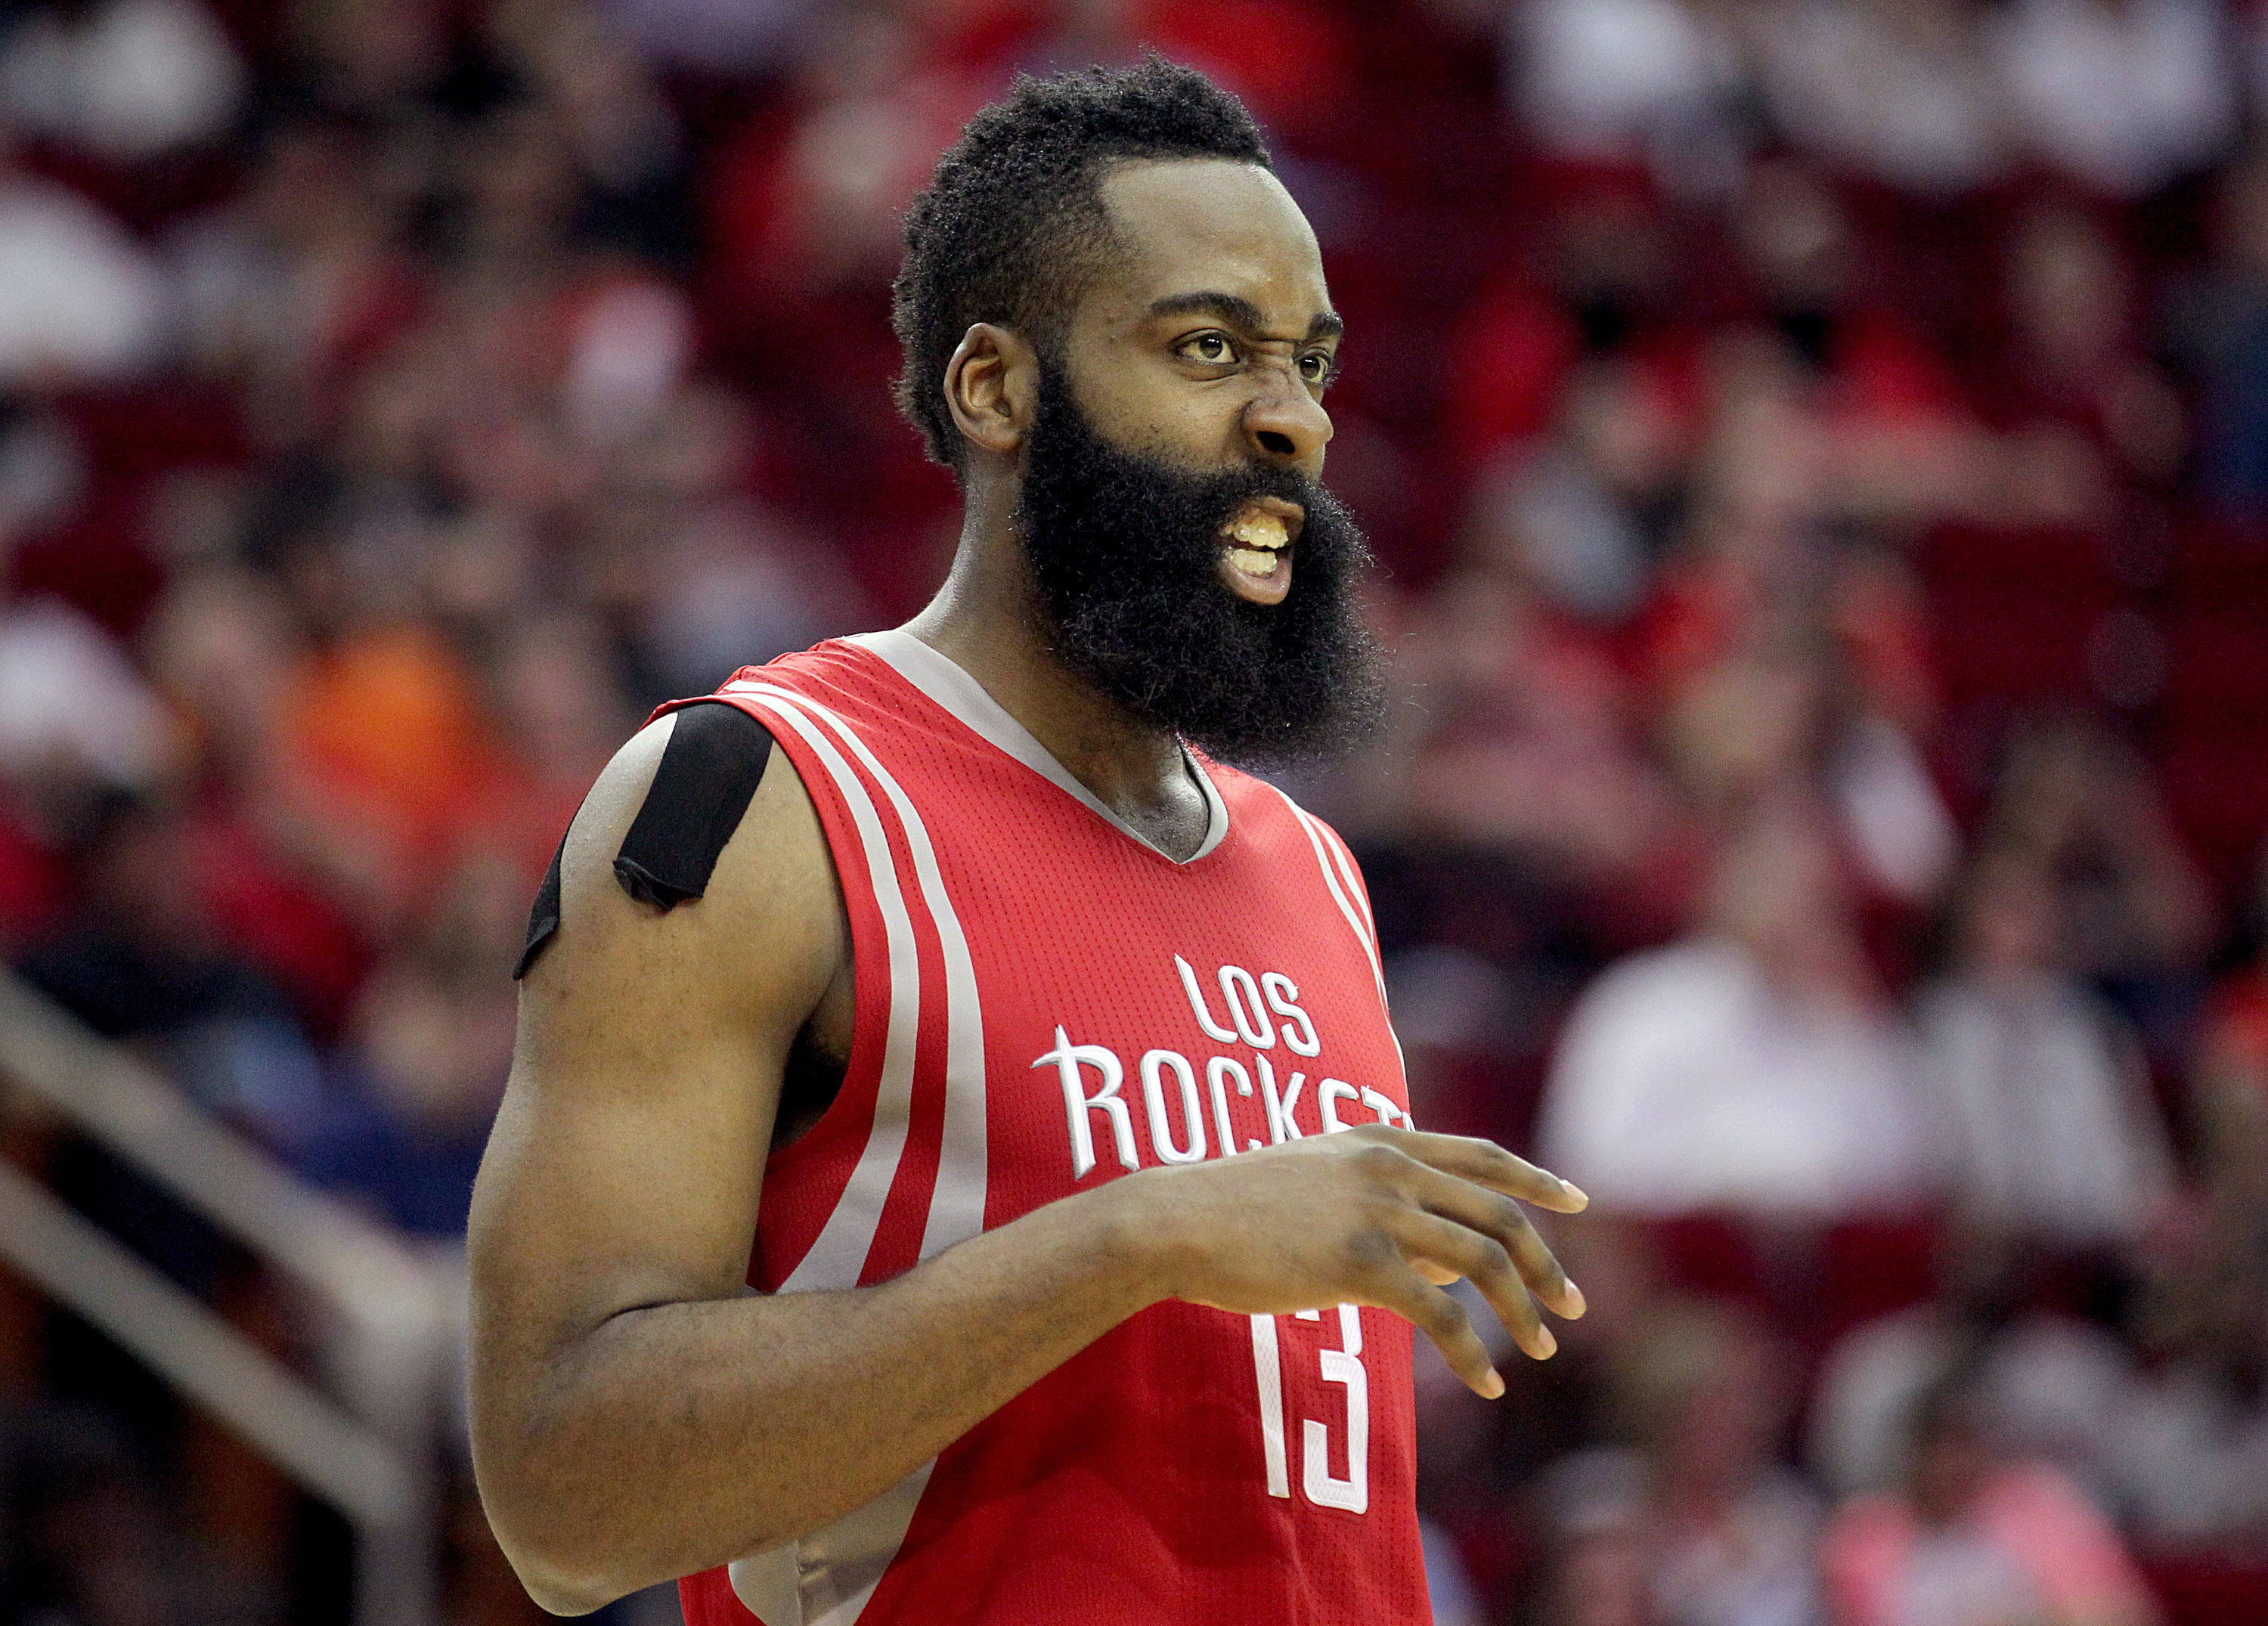 James-Harden-has-the-intention-to-return-to-Rockets--64-53.jpg